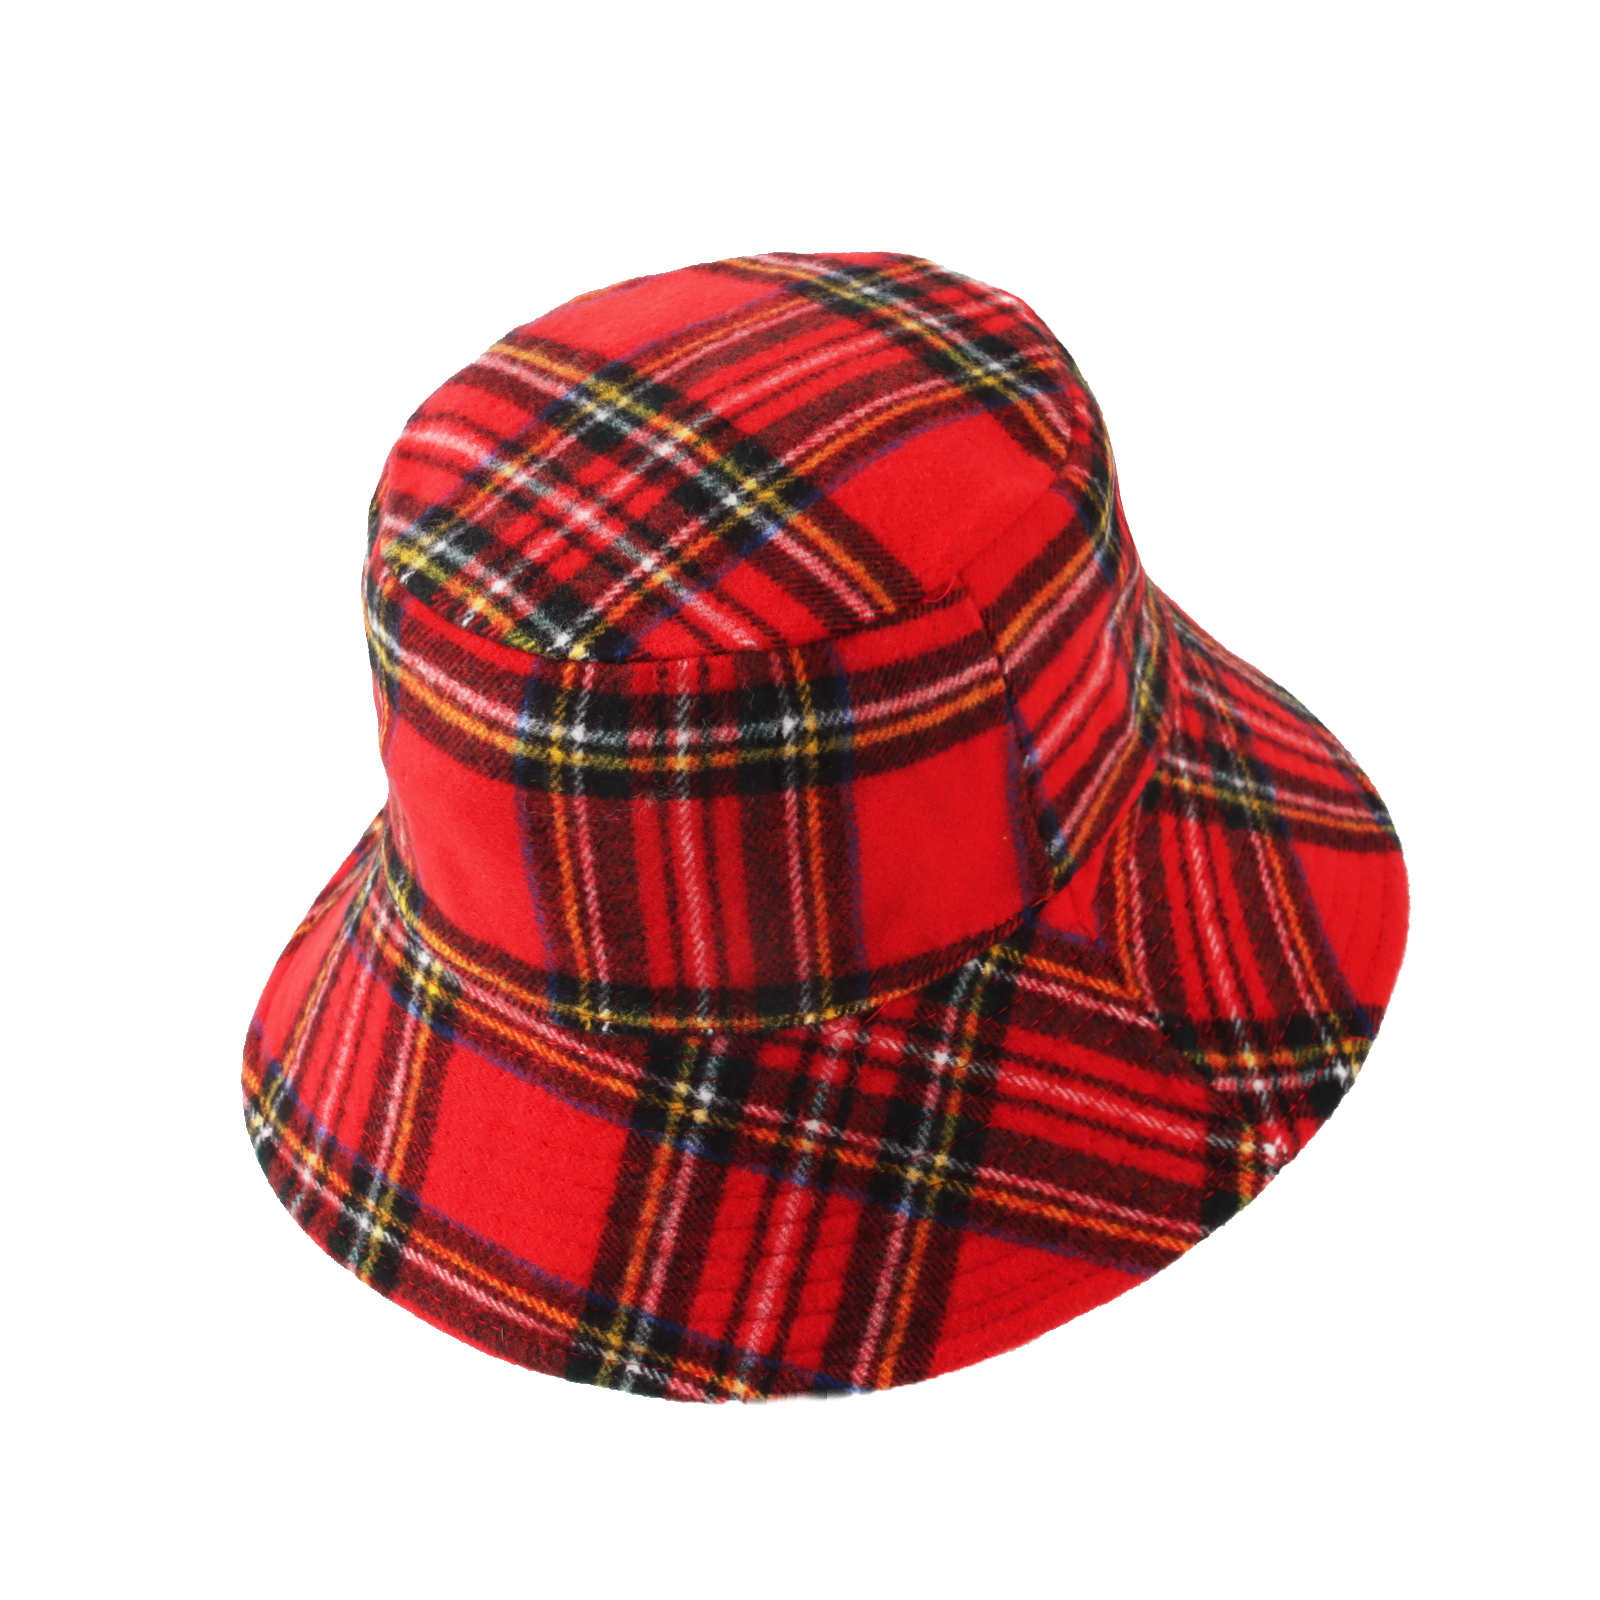 WITHMOONS Polyester Plaid Tartan Bucket Fedora Hat Winter Check Cap HMB1299 (Red) - image 4 of 5